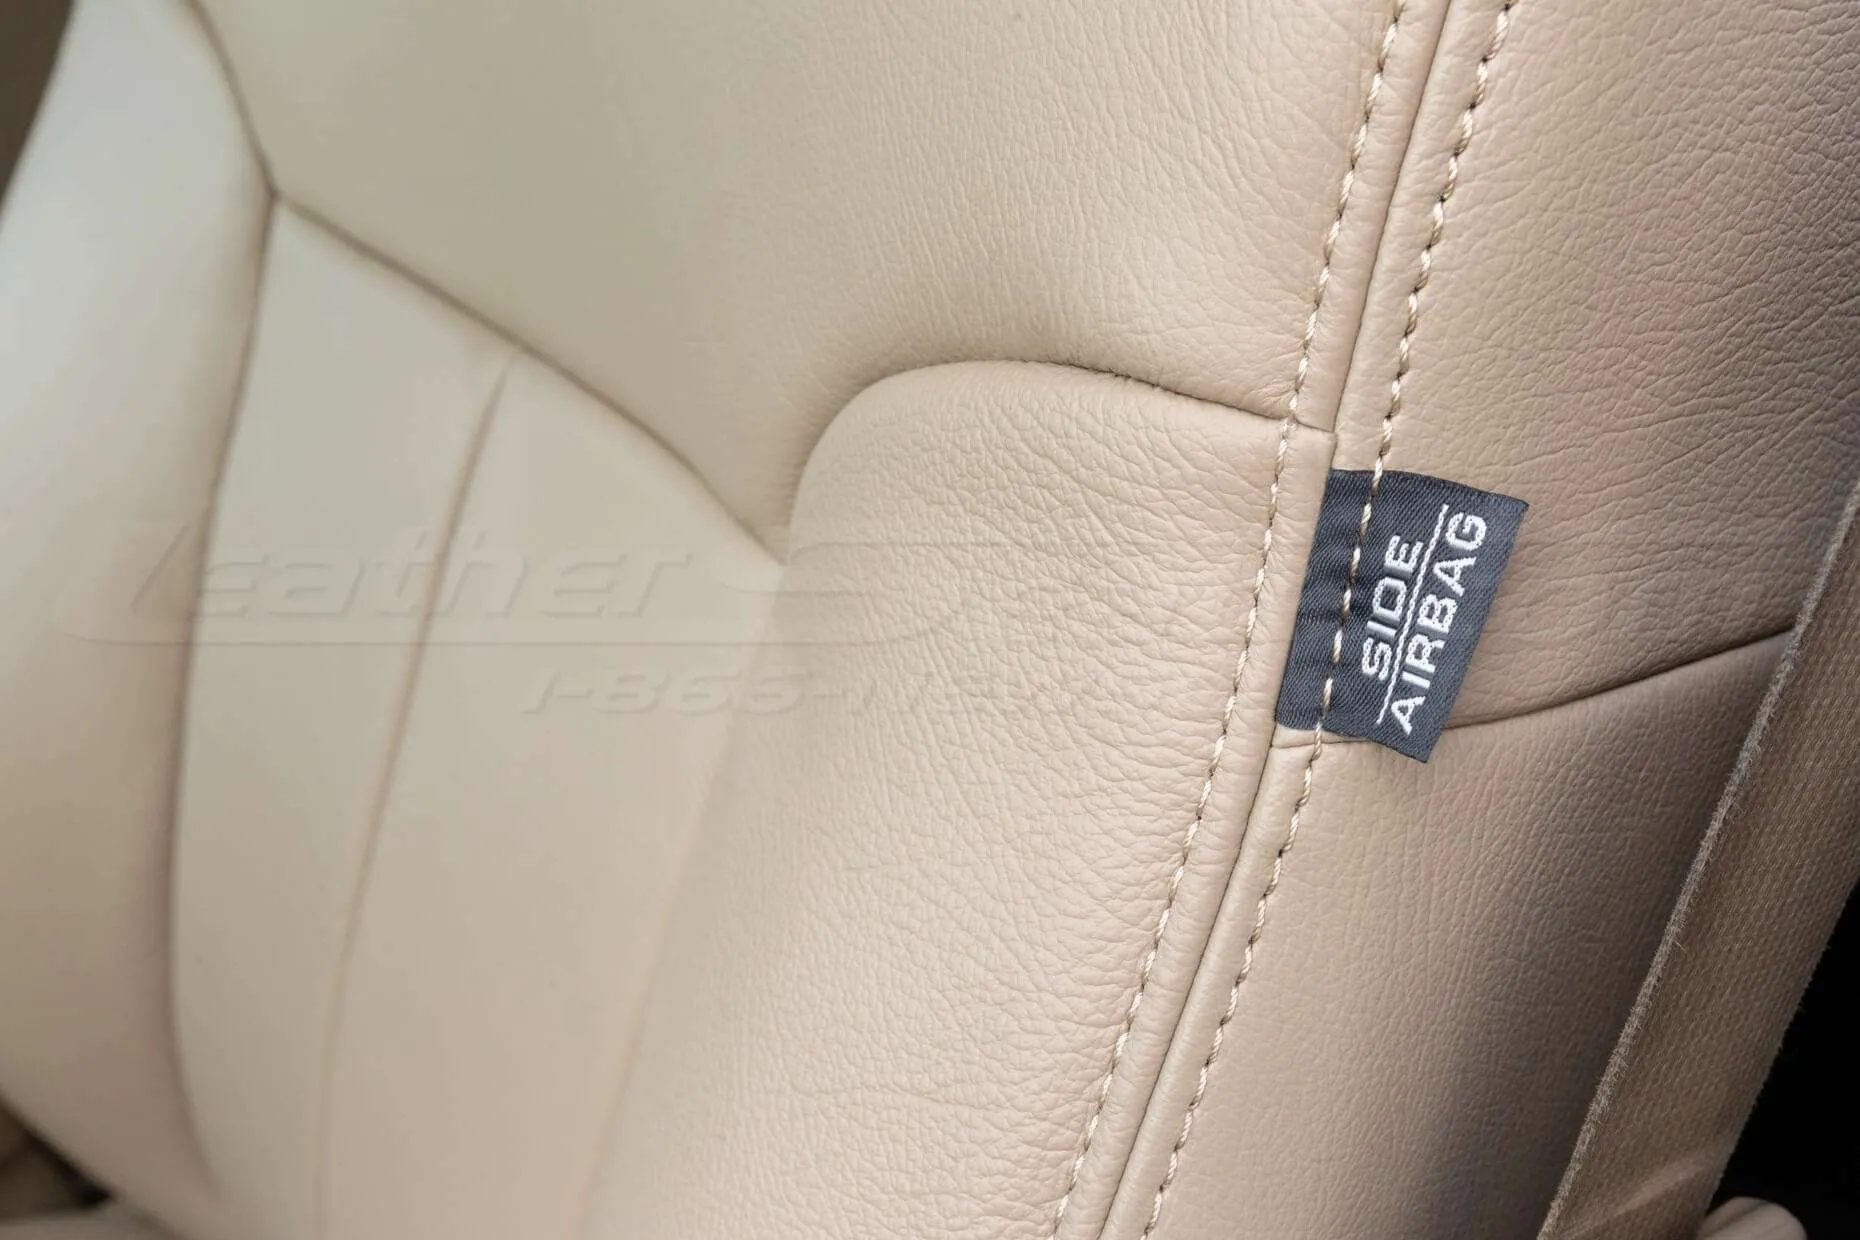 Ford F-150 Leather Upholstery Kit - Sandstone - Installed - Side airbag tag